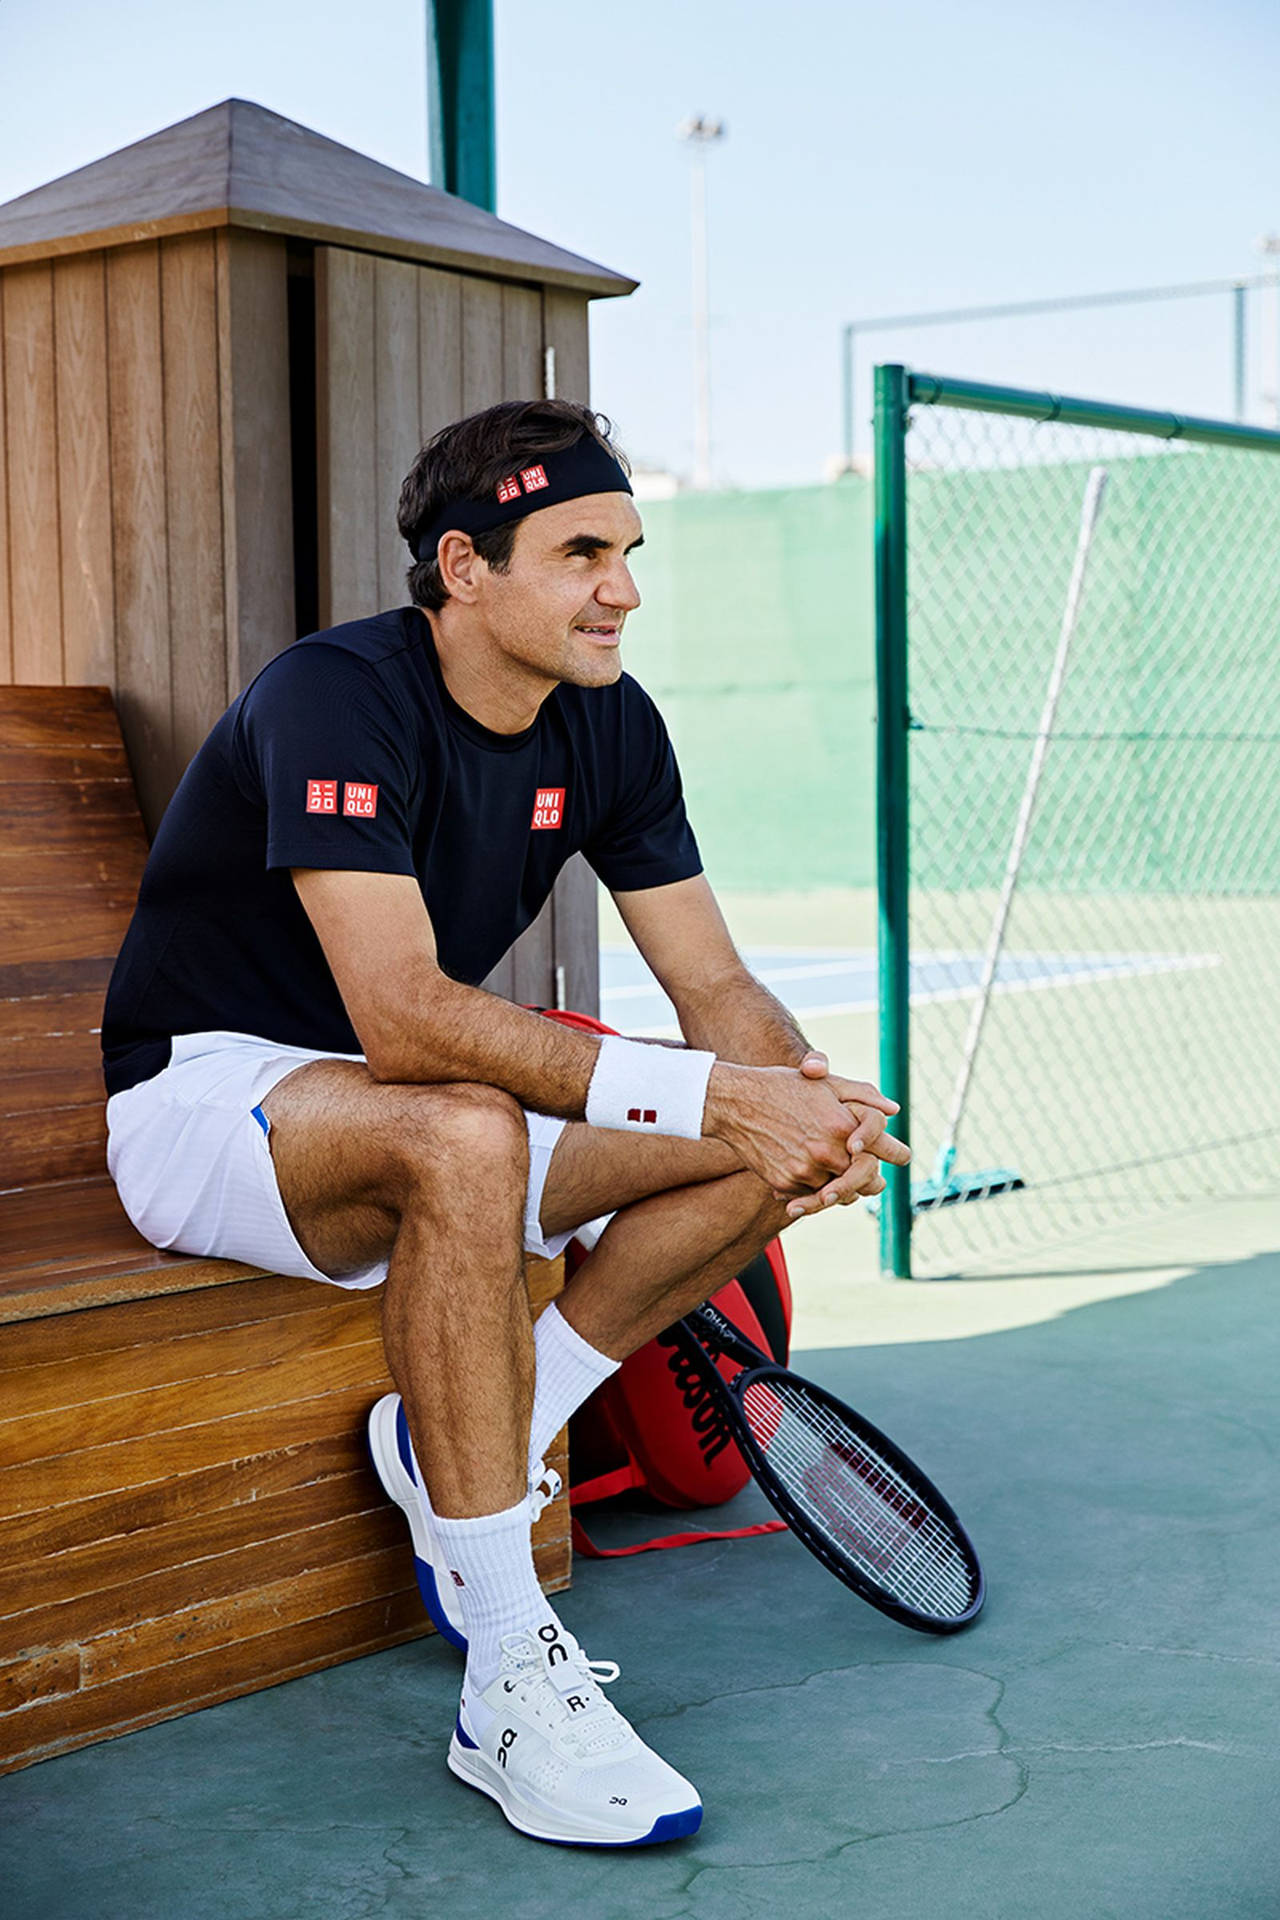 Roger Federer Uniqlo Tennis Outfit Background